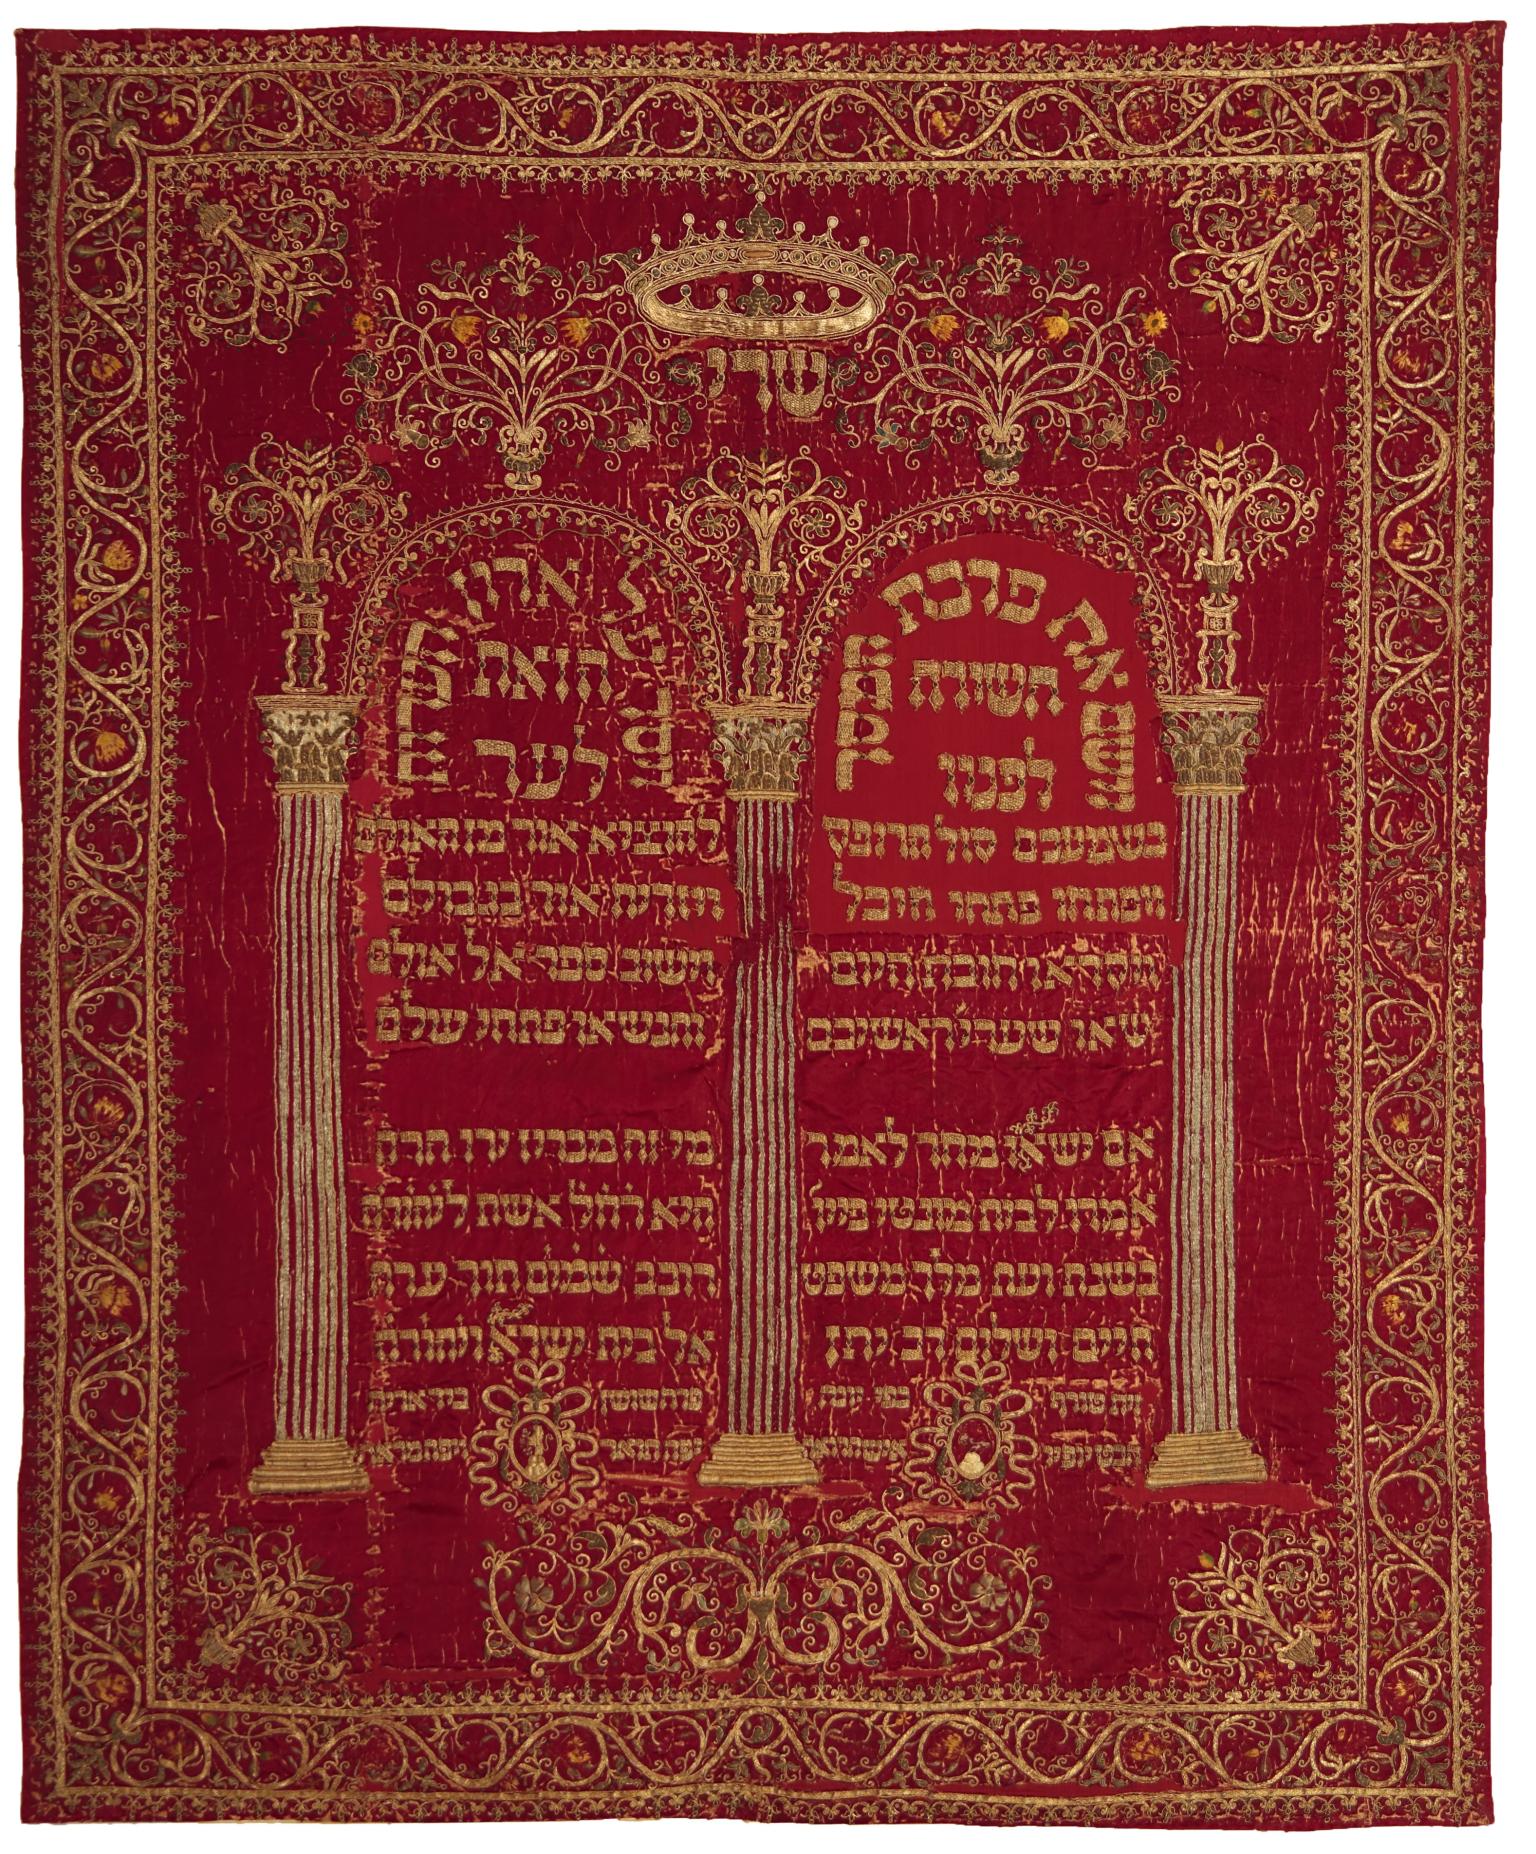 Cloth embroidered with Hebrew writing under columned archway and surrounded by decorative border. 